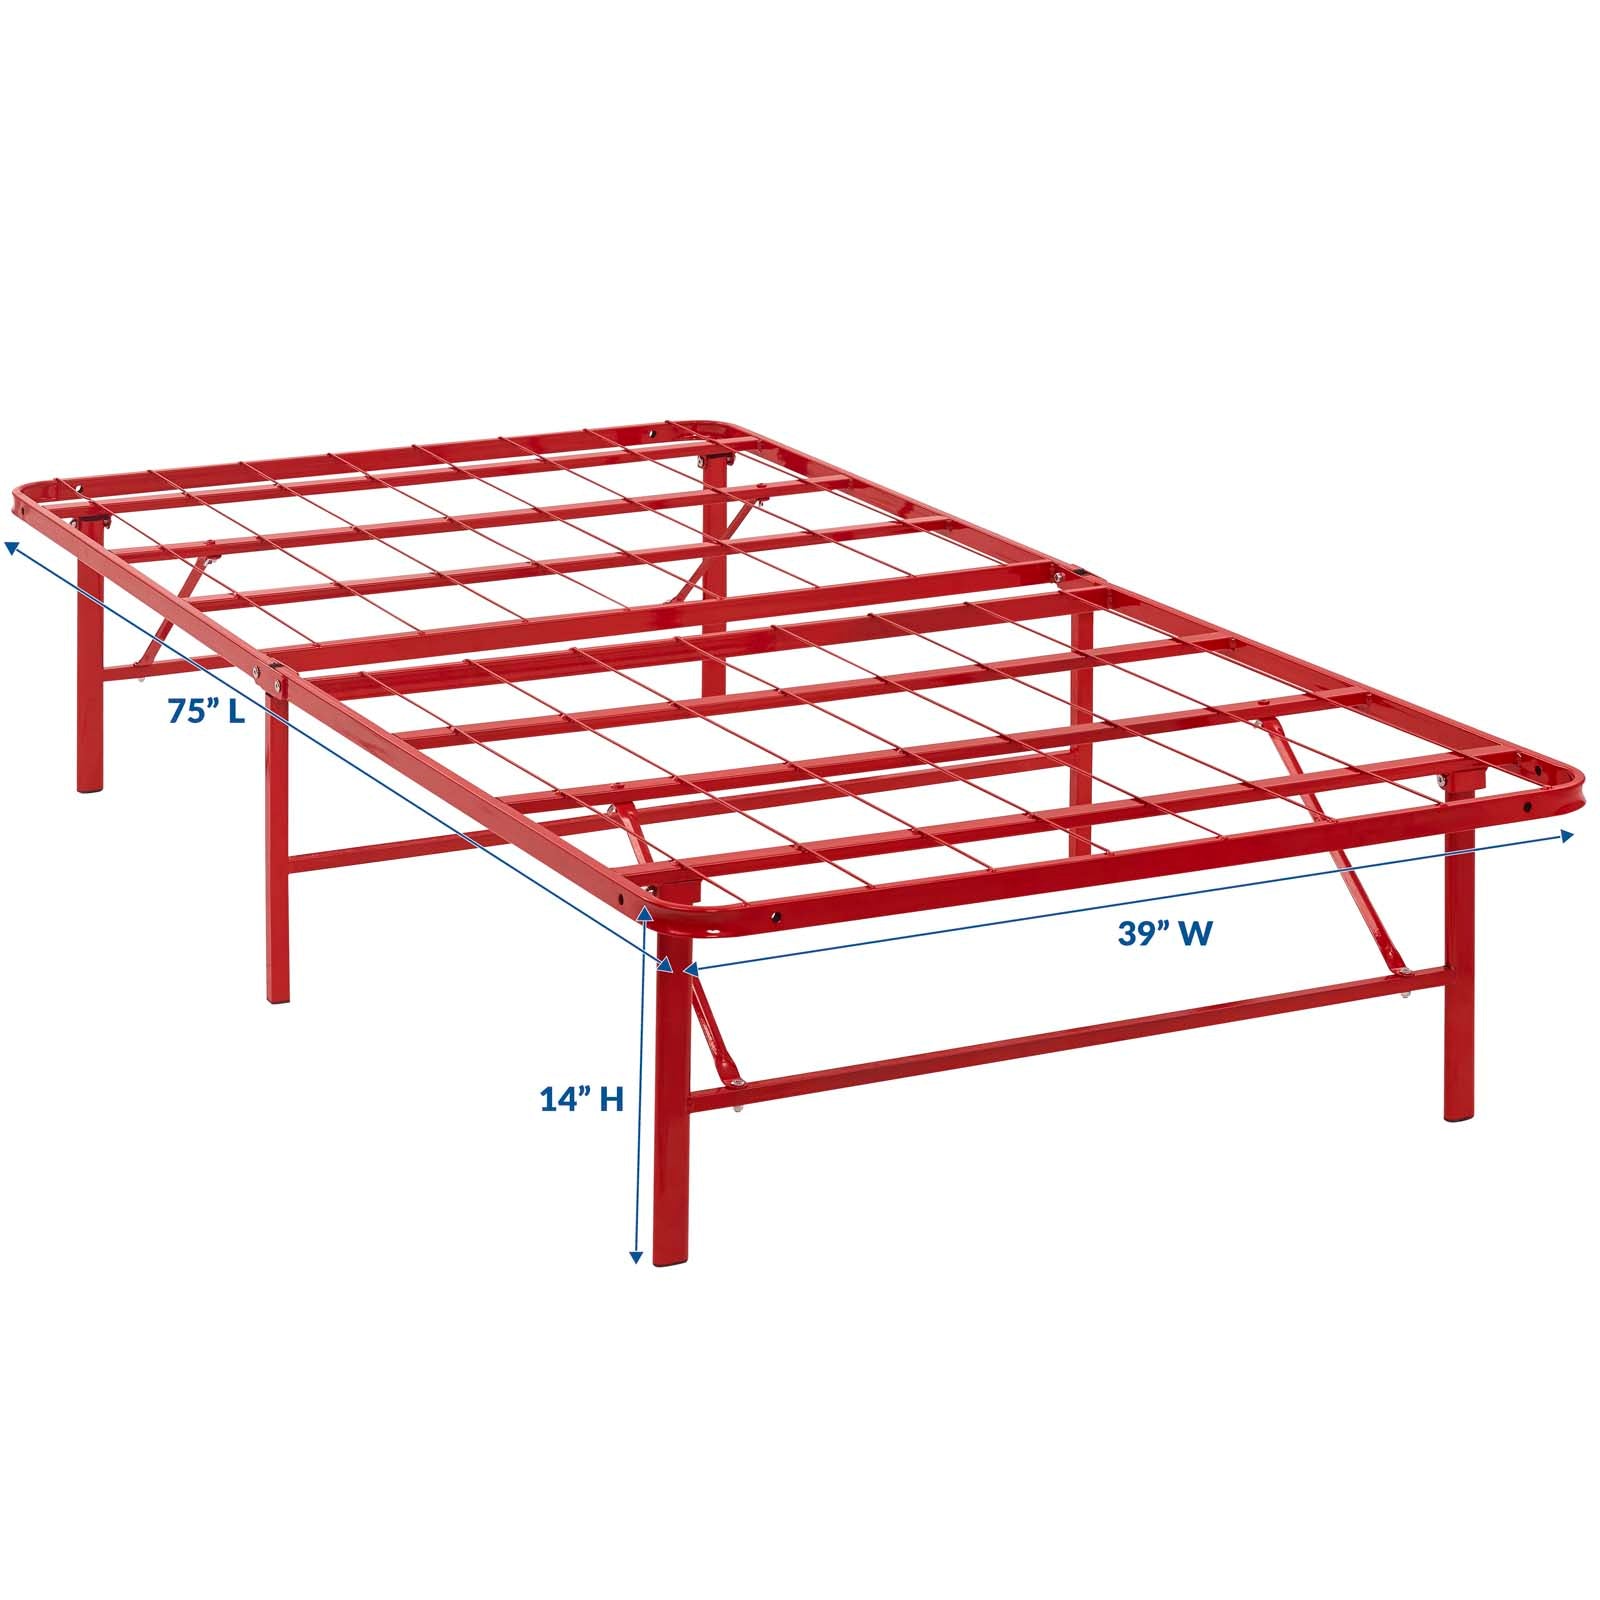 Modway Beds - Horizon Twin Stainless Steel Bed Frame Red